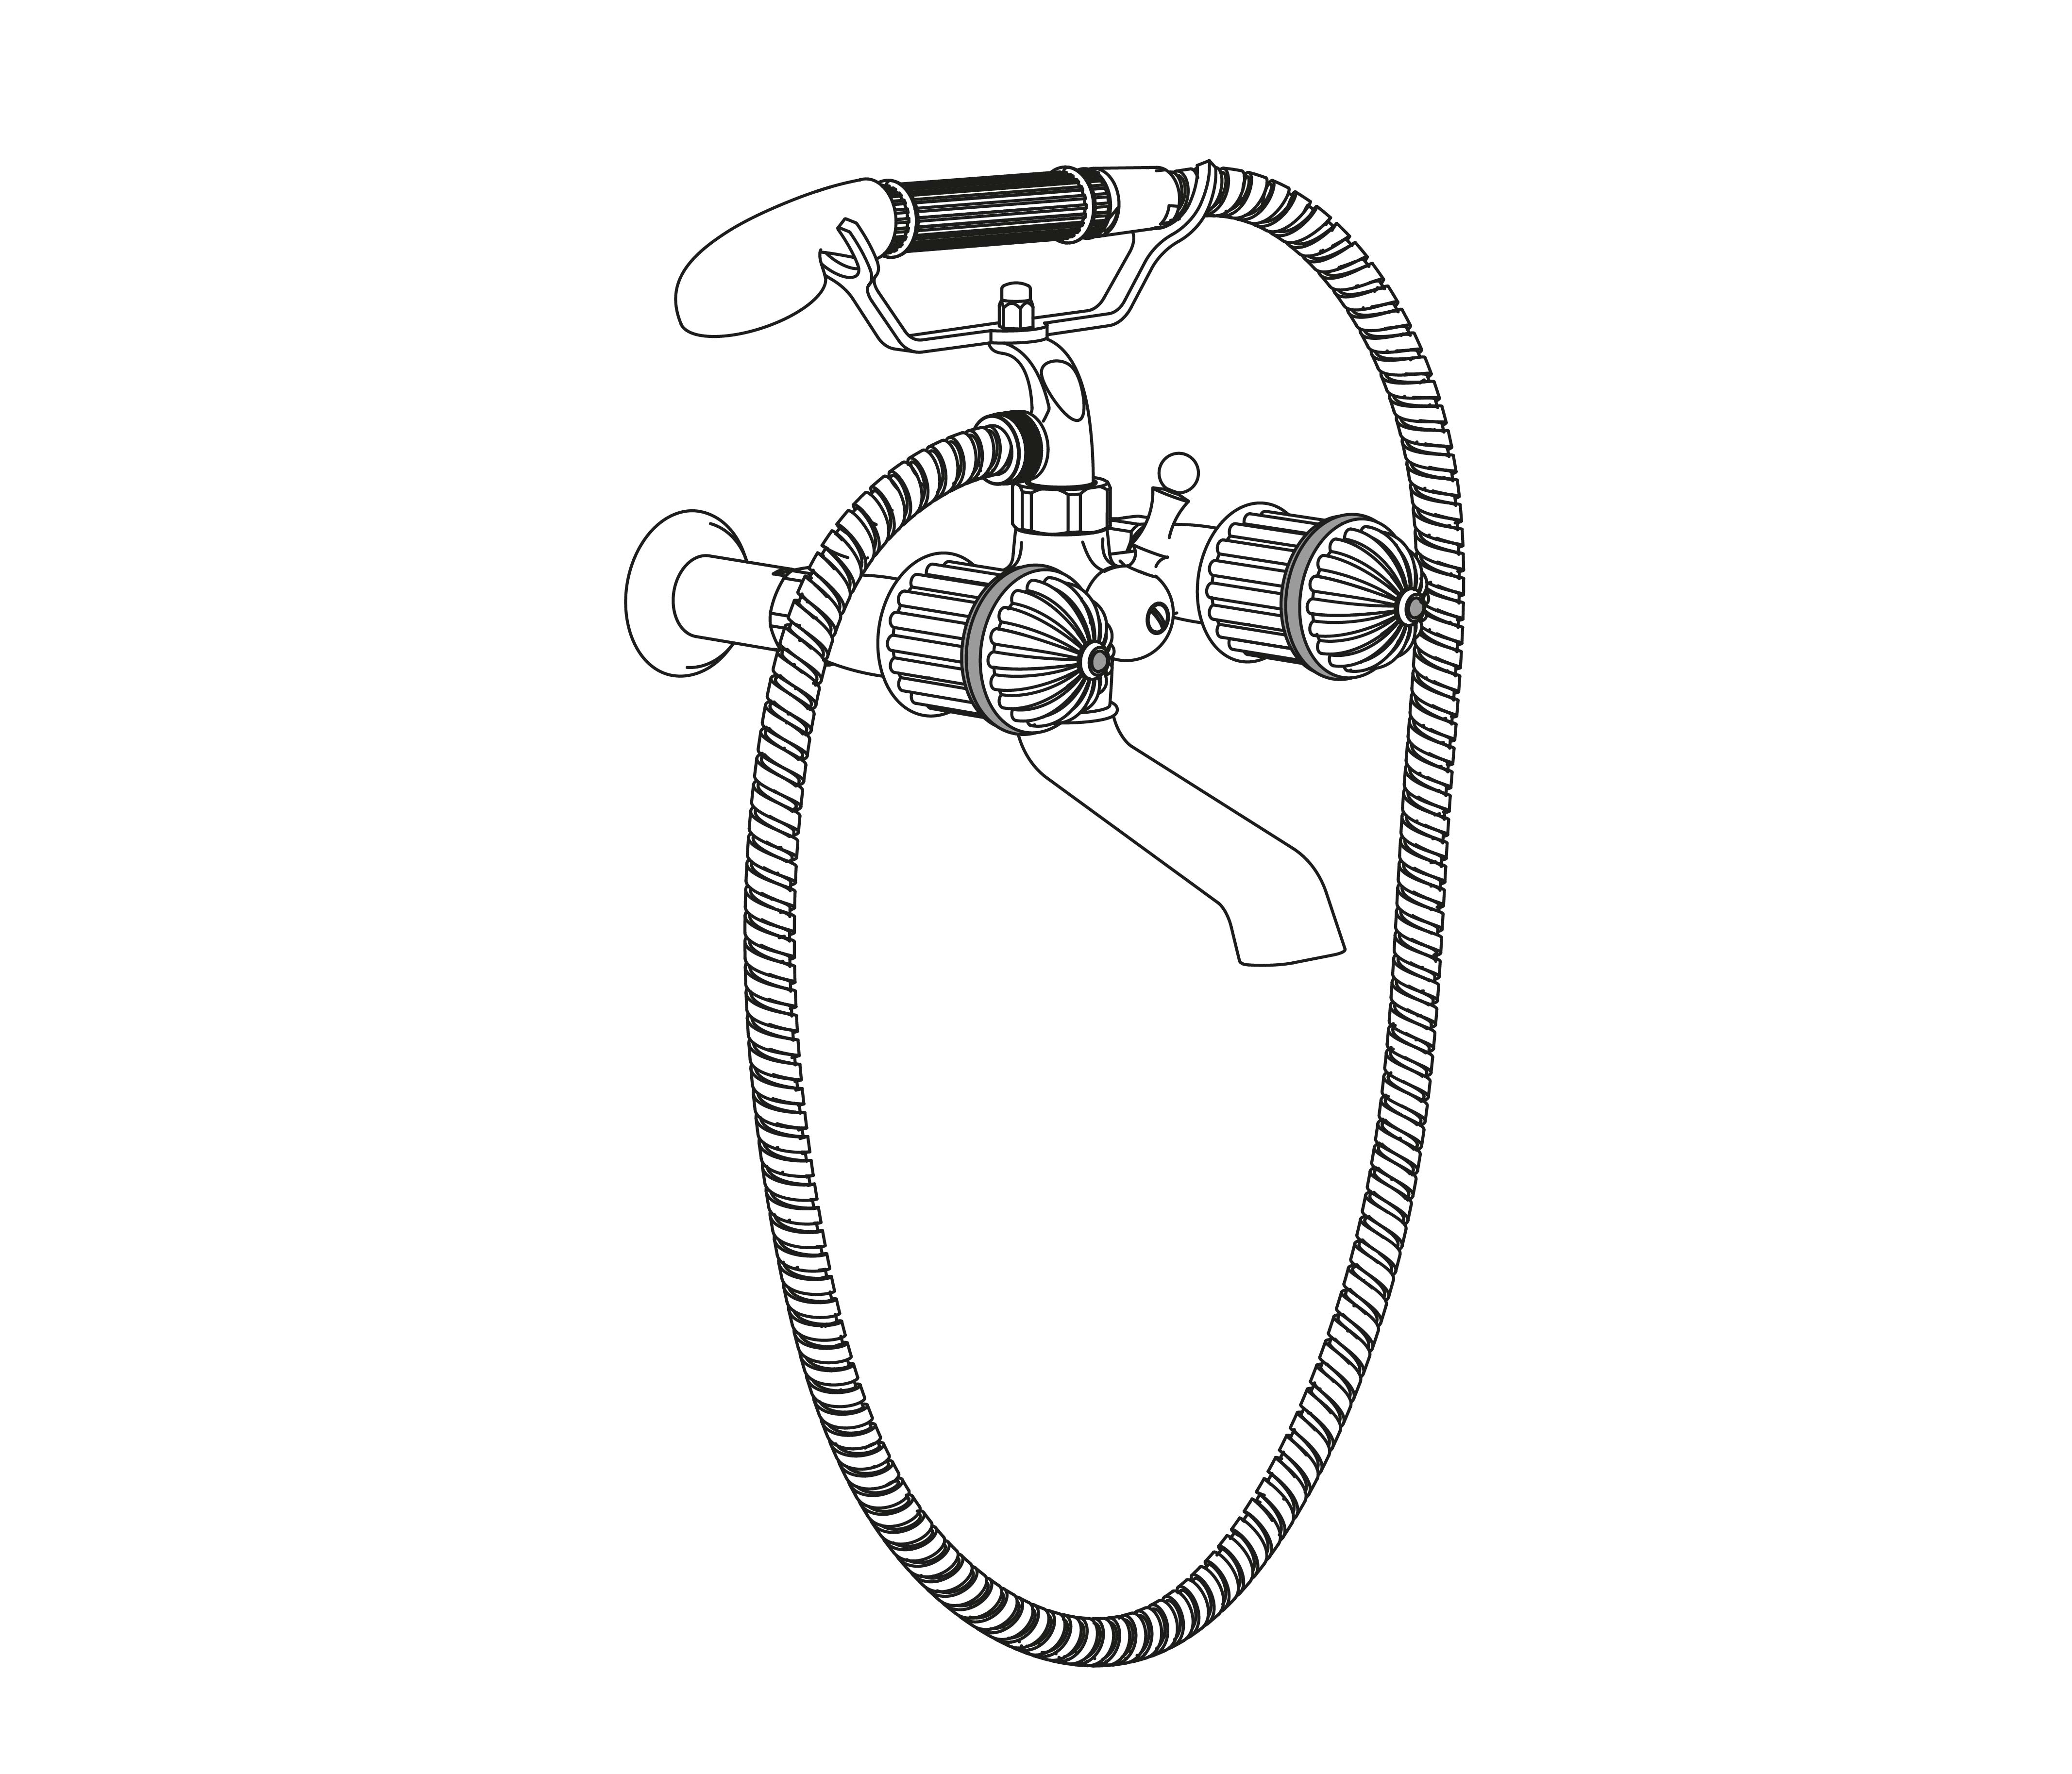 S182-3201 Wall mounted bath and shower mixer